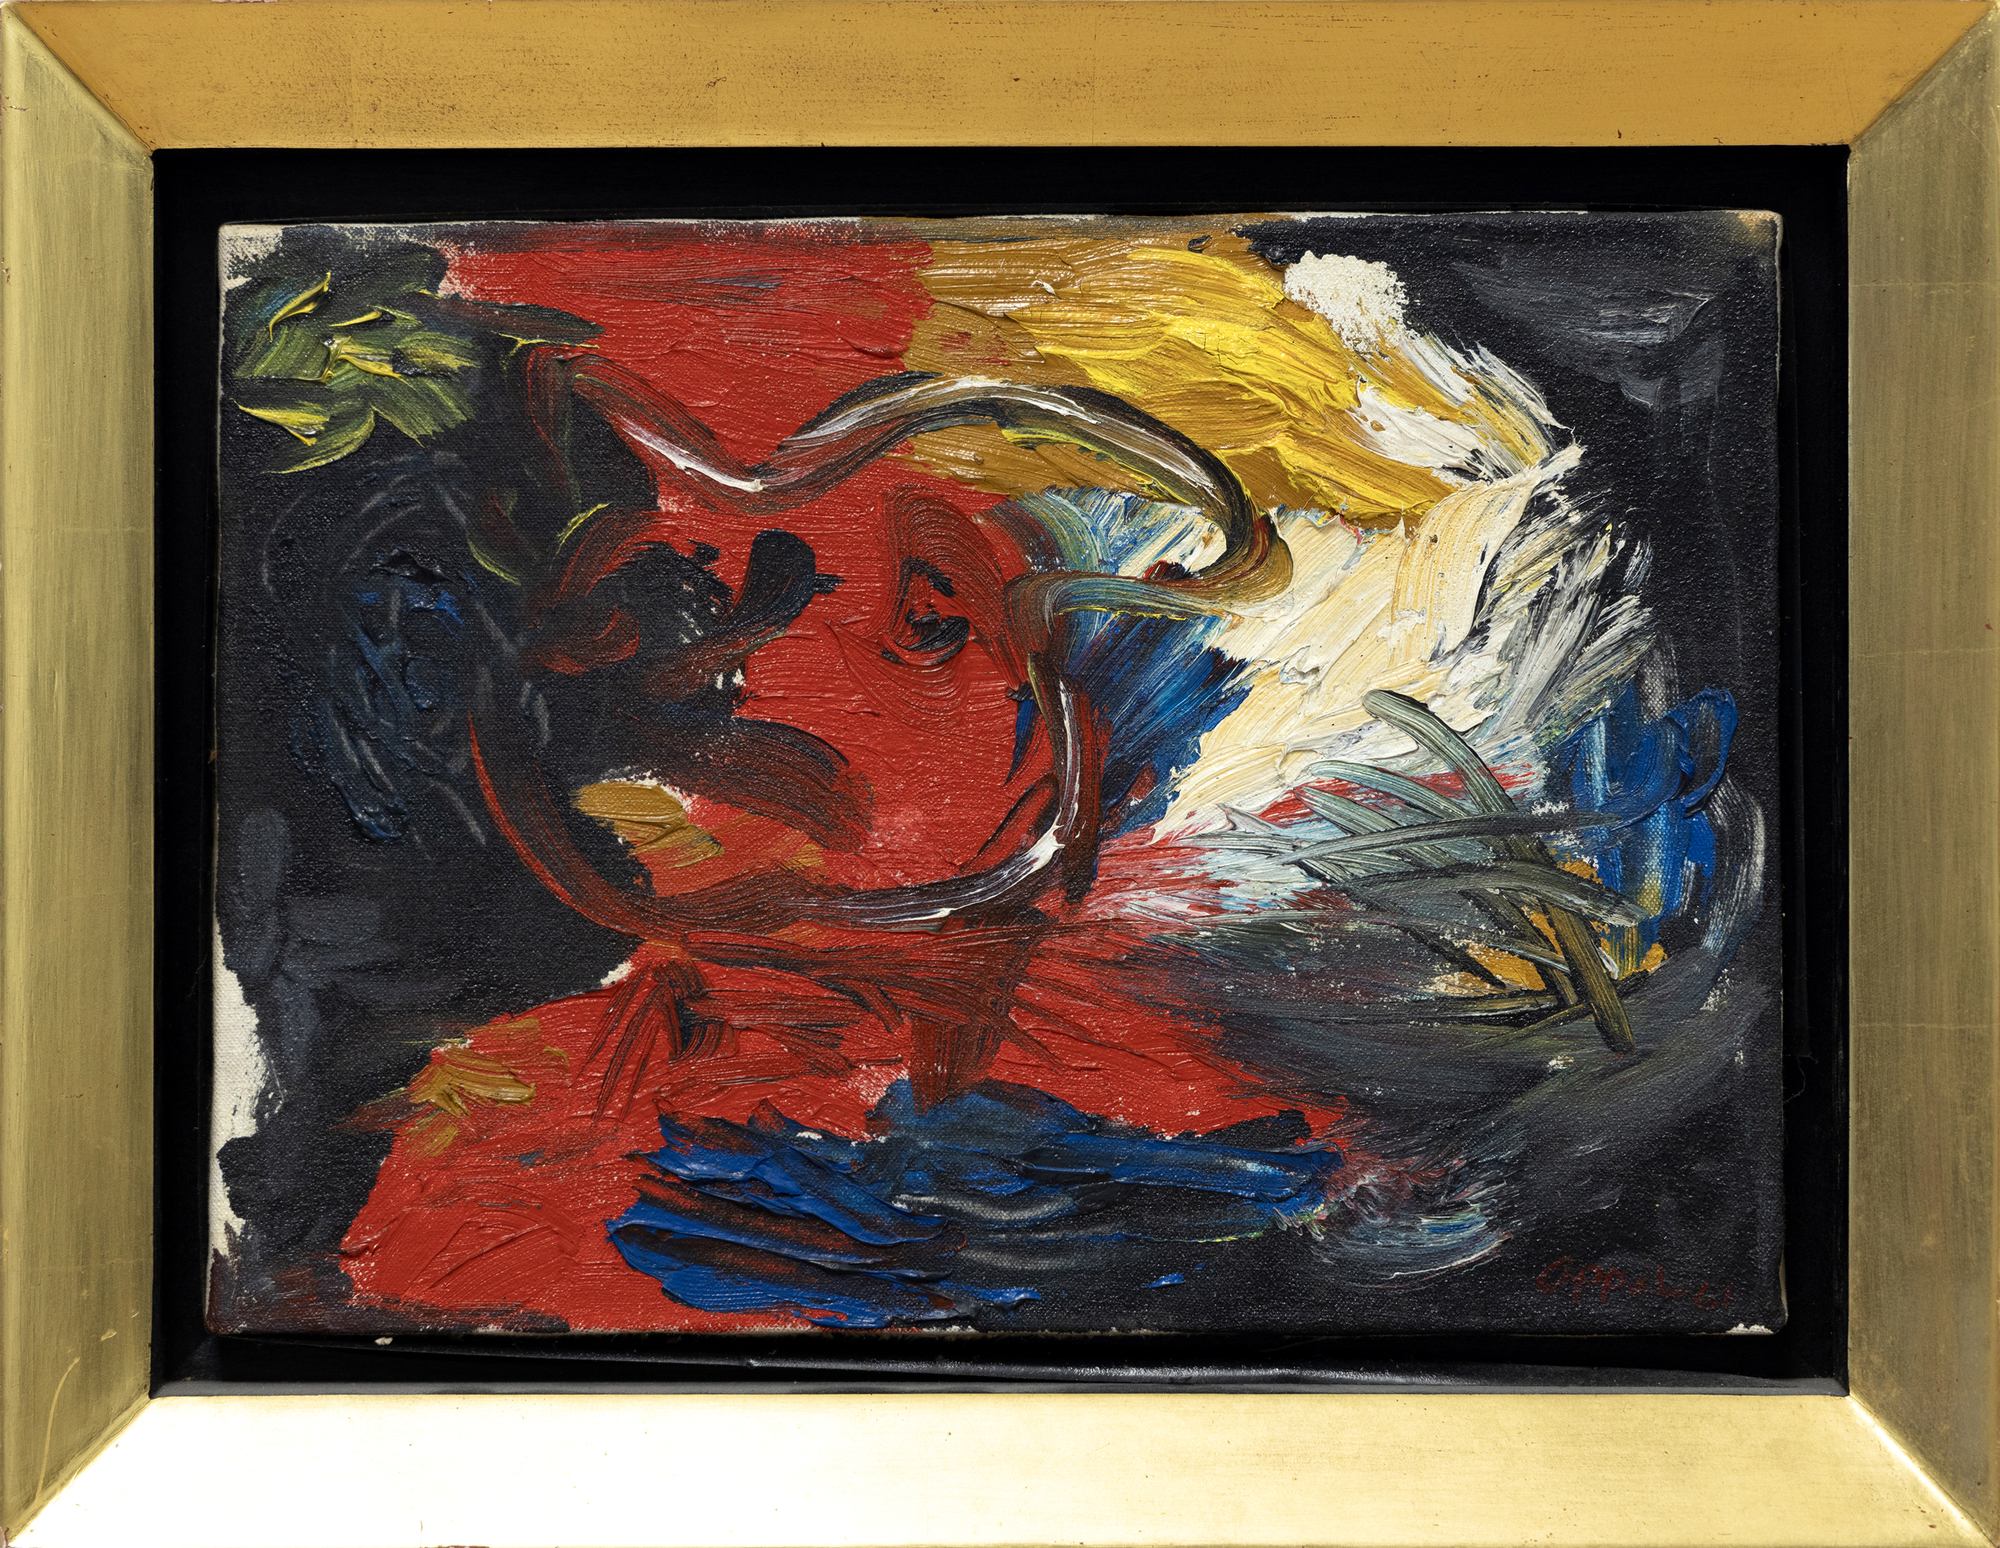 KAREL APPEL - Head in the Storm - oil on canvas - 10 x 14 1/4 in.